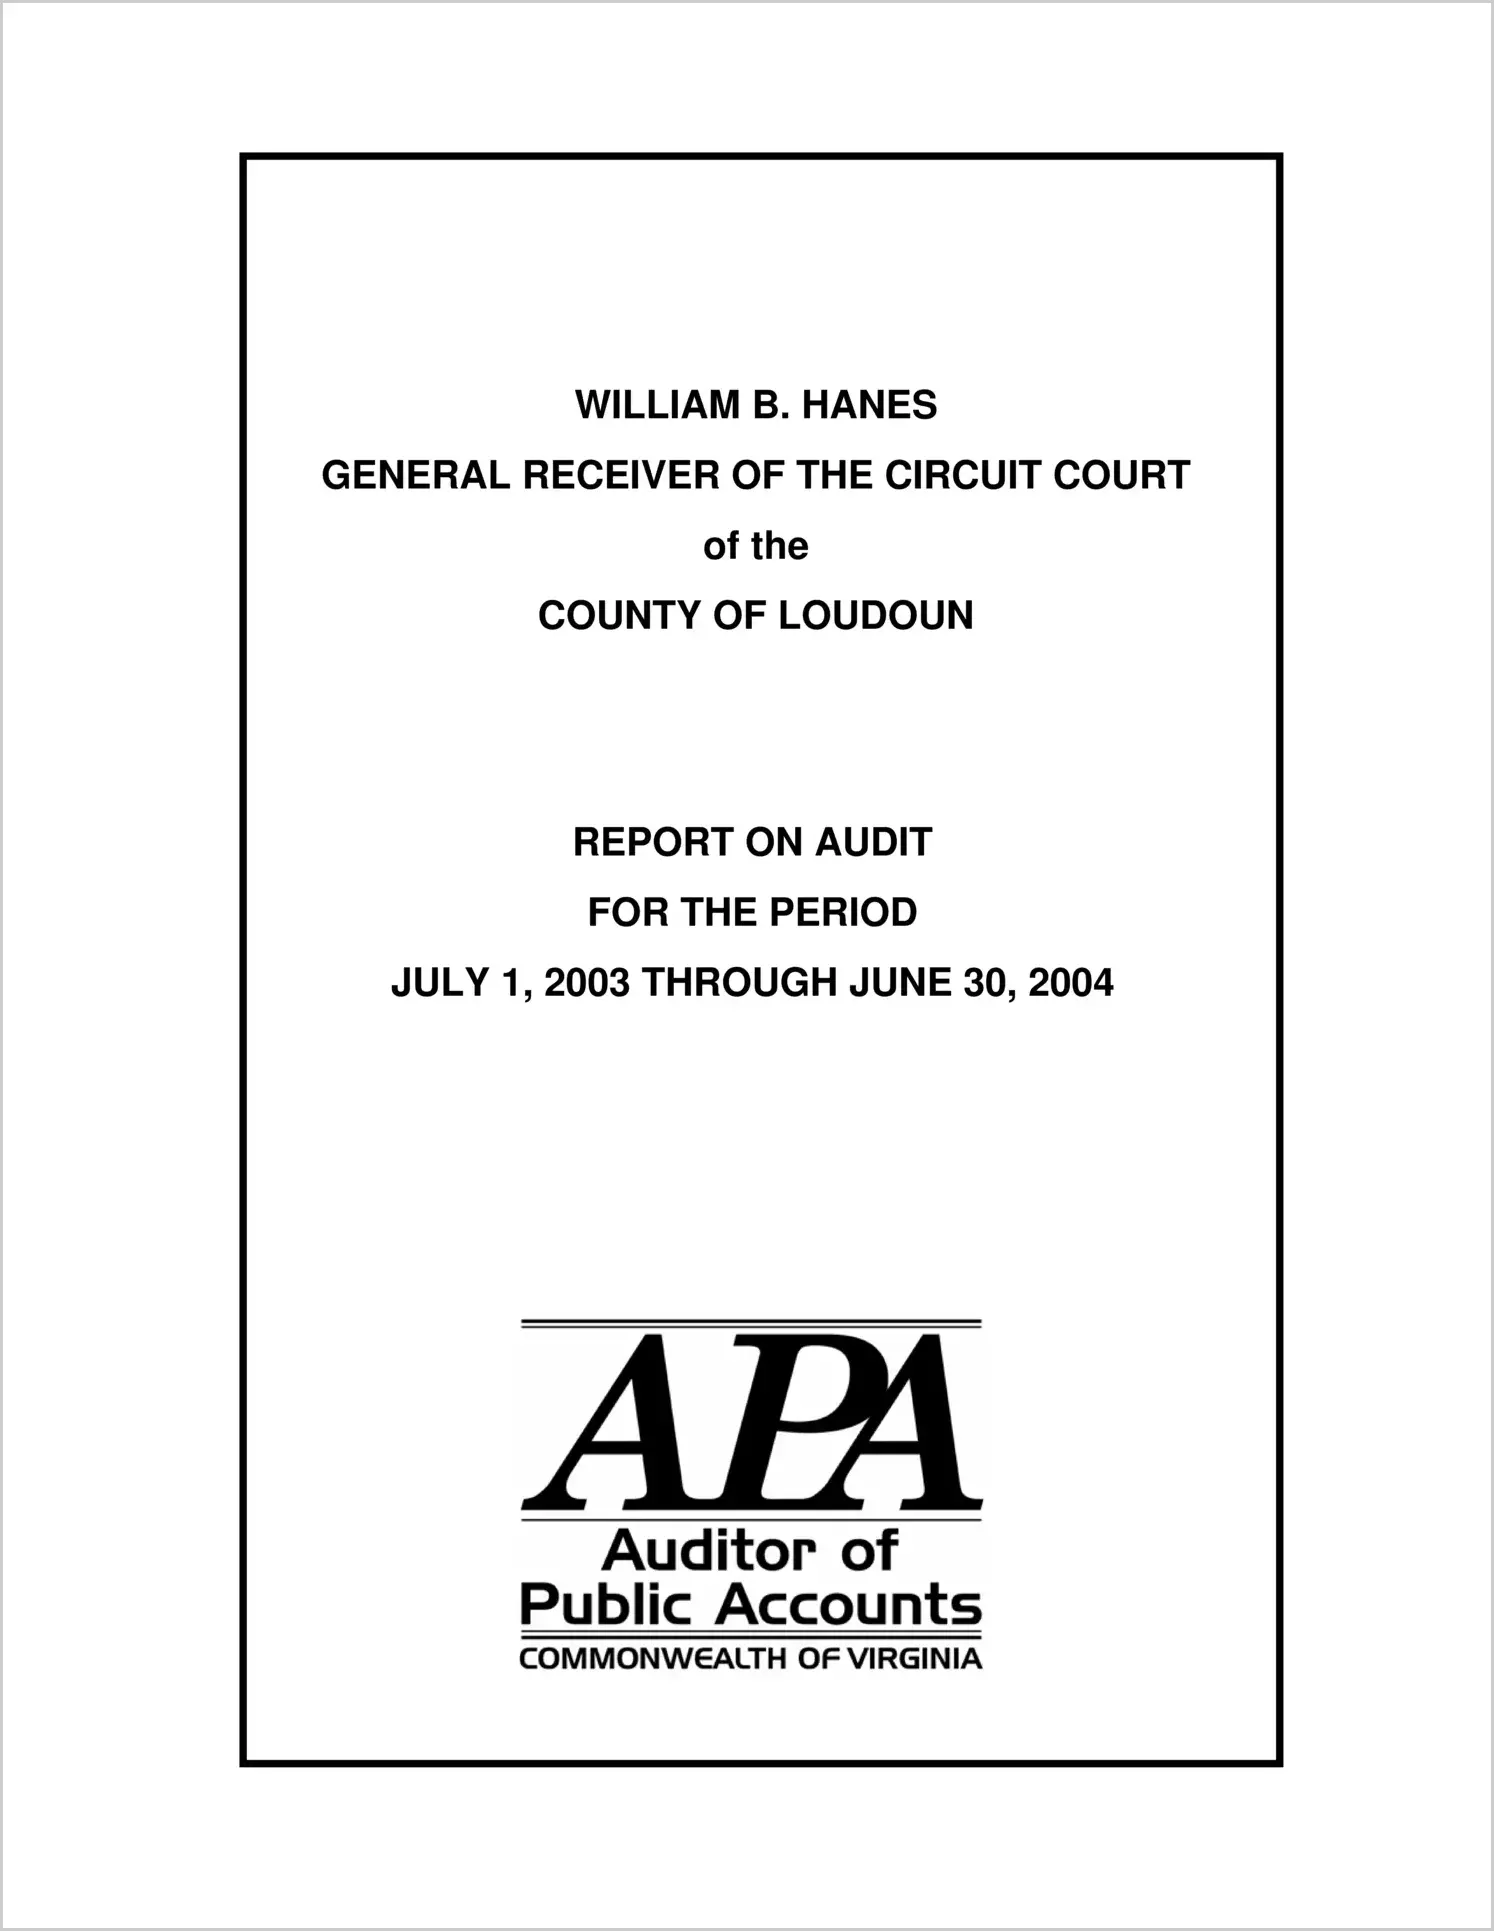 General Receiver of the Circuit Court of the County of Loudoun for the year ended June 30, 2004